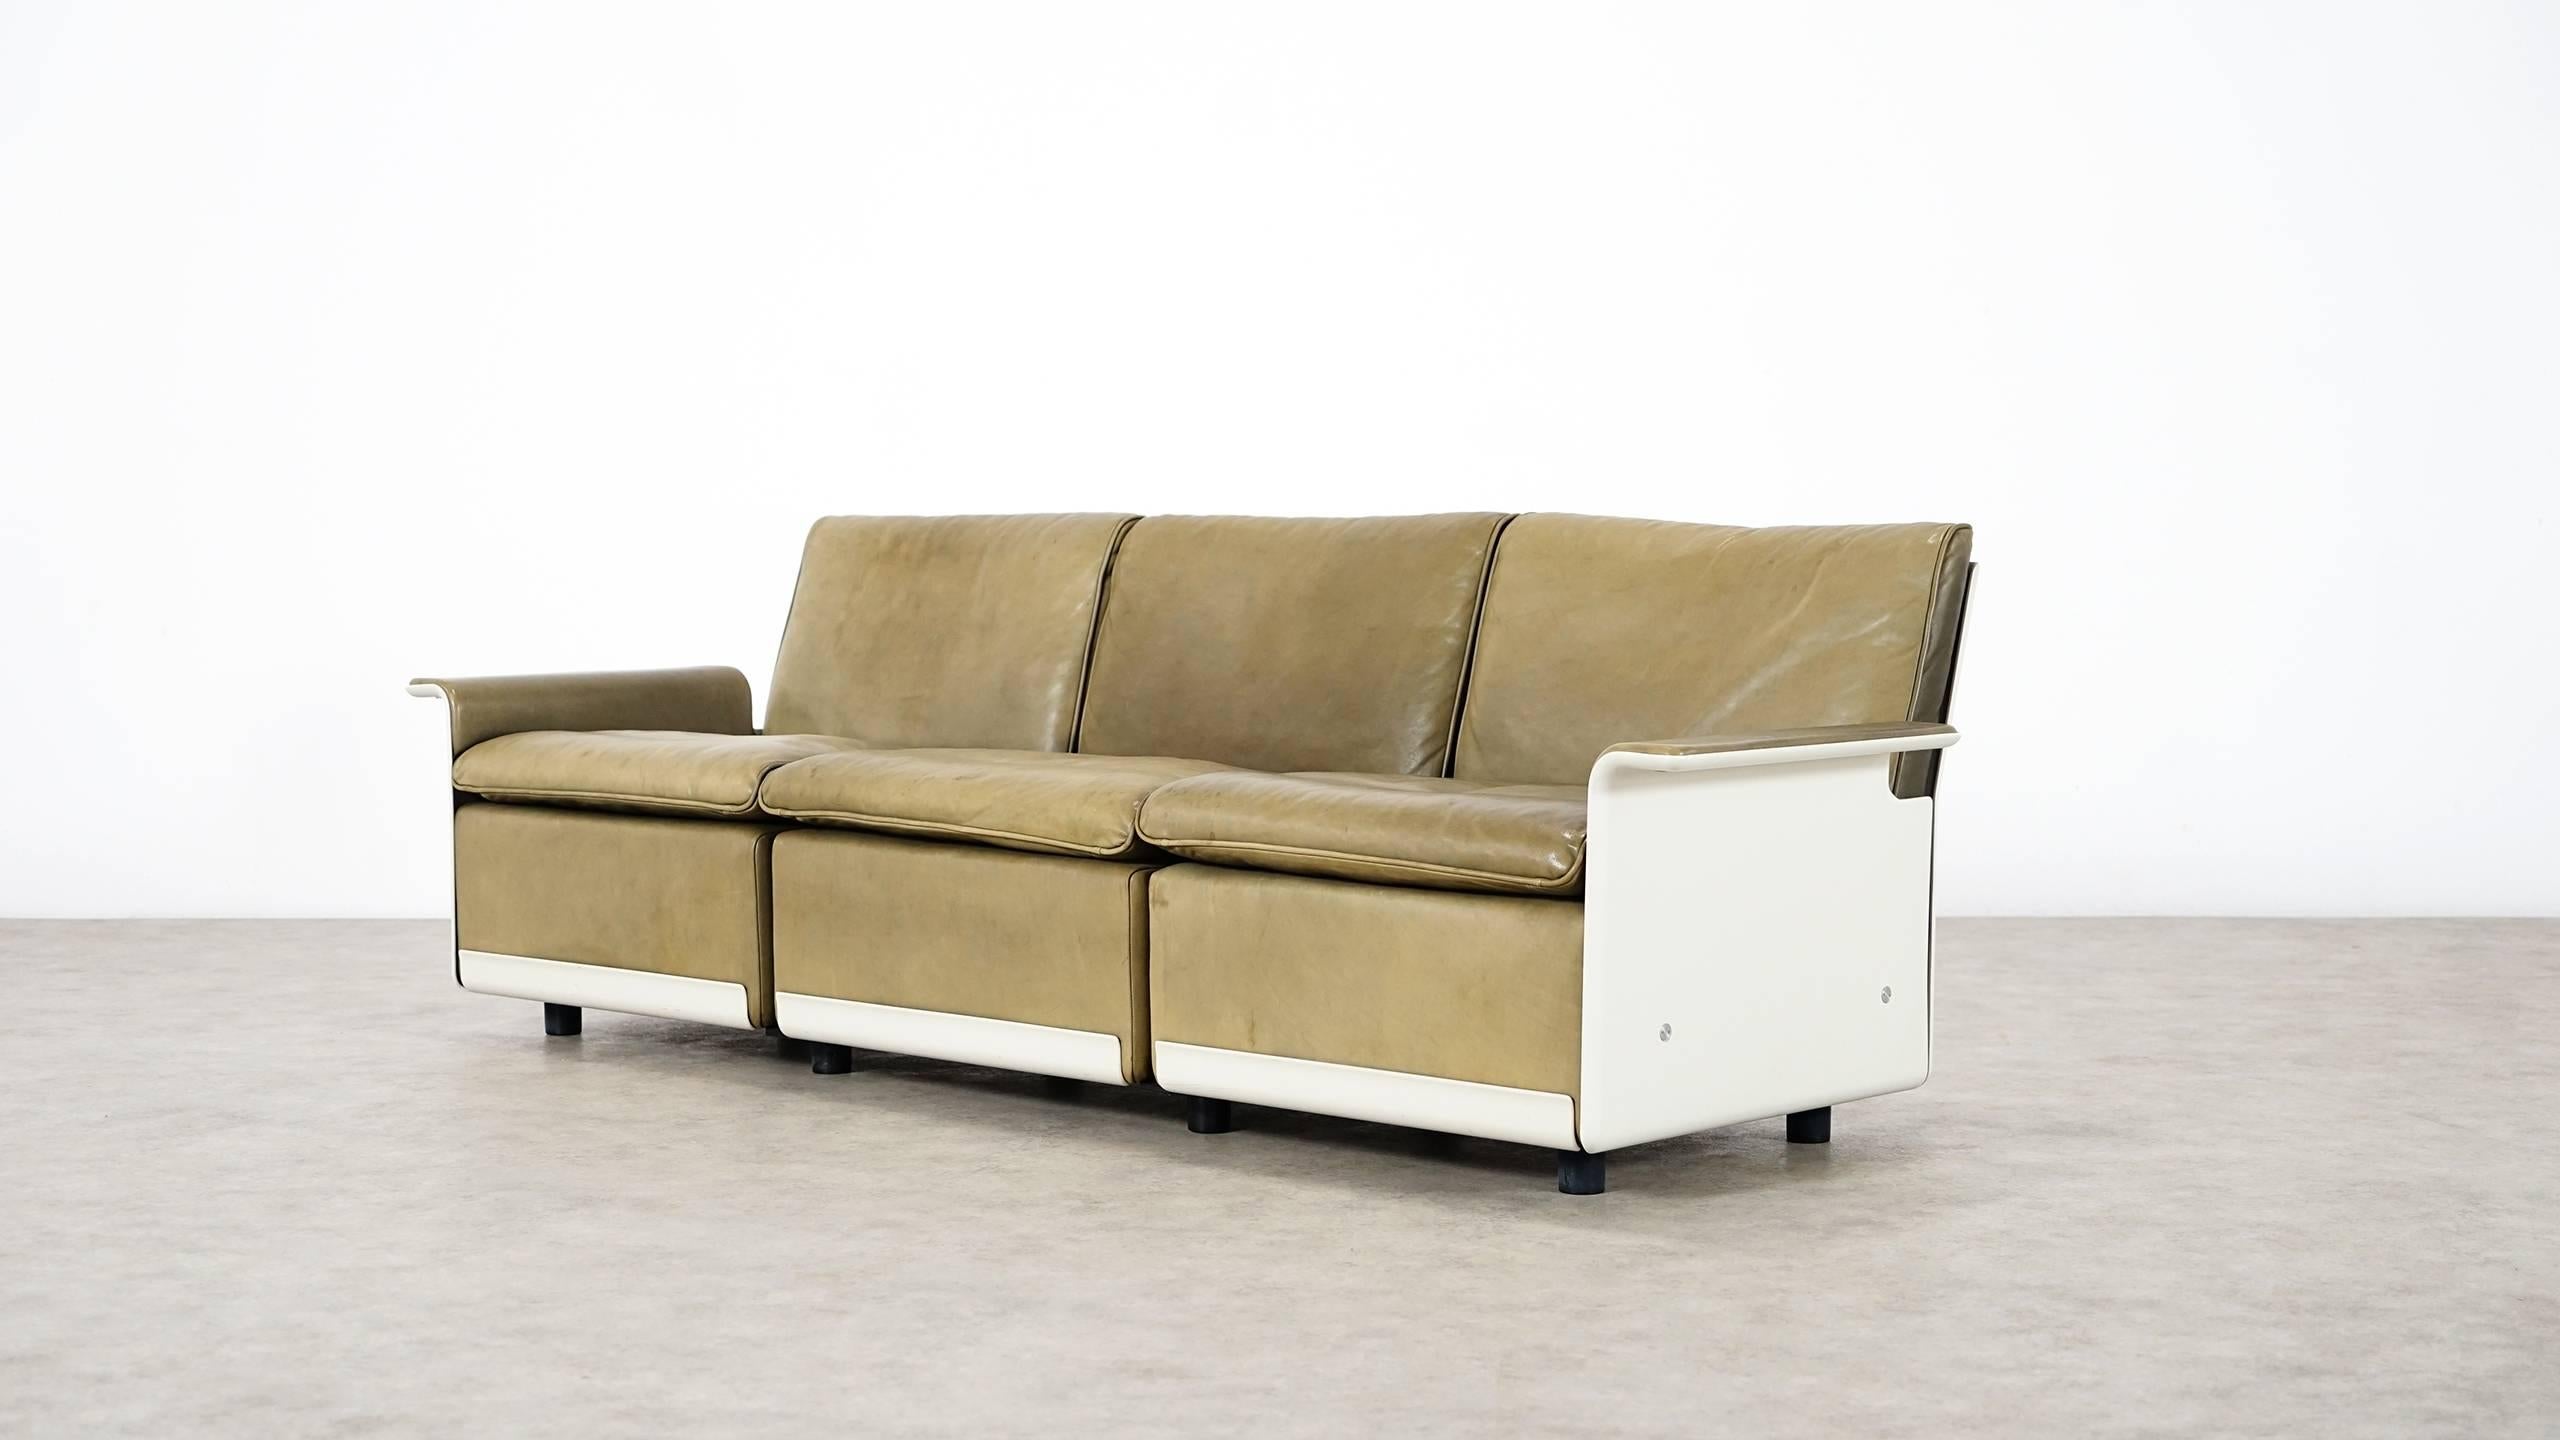 Mid-20th Century Dieter Rams Sofa and Stool RZ 62 in Olivgreen Leather by Vitsœ, Three-Seat